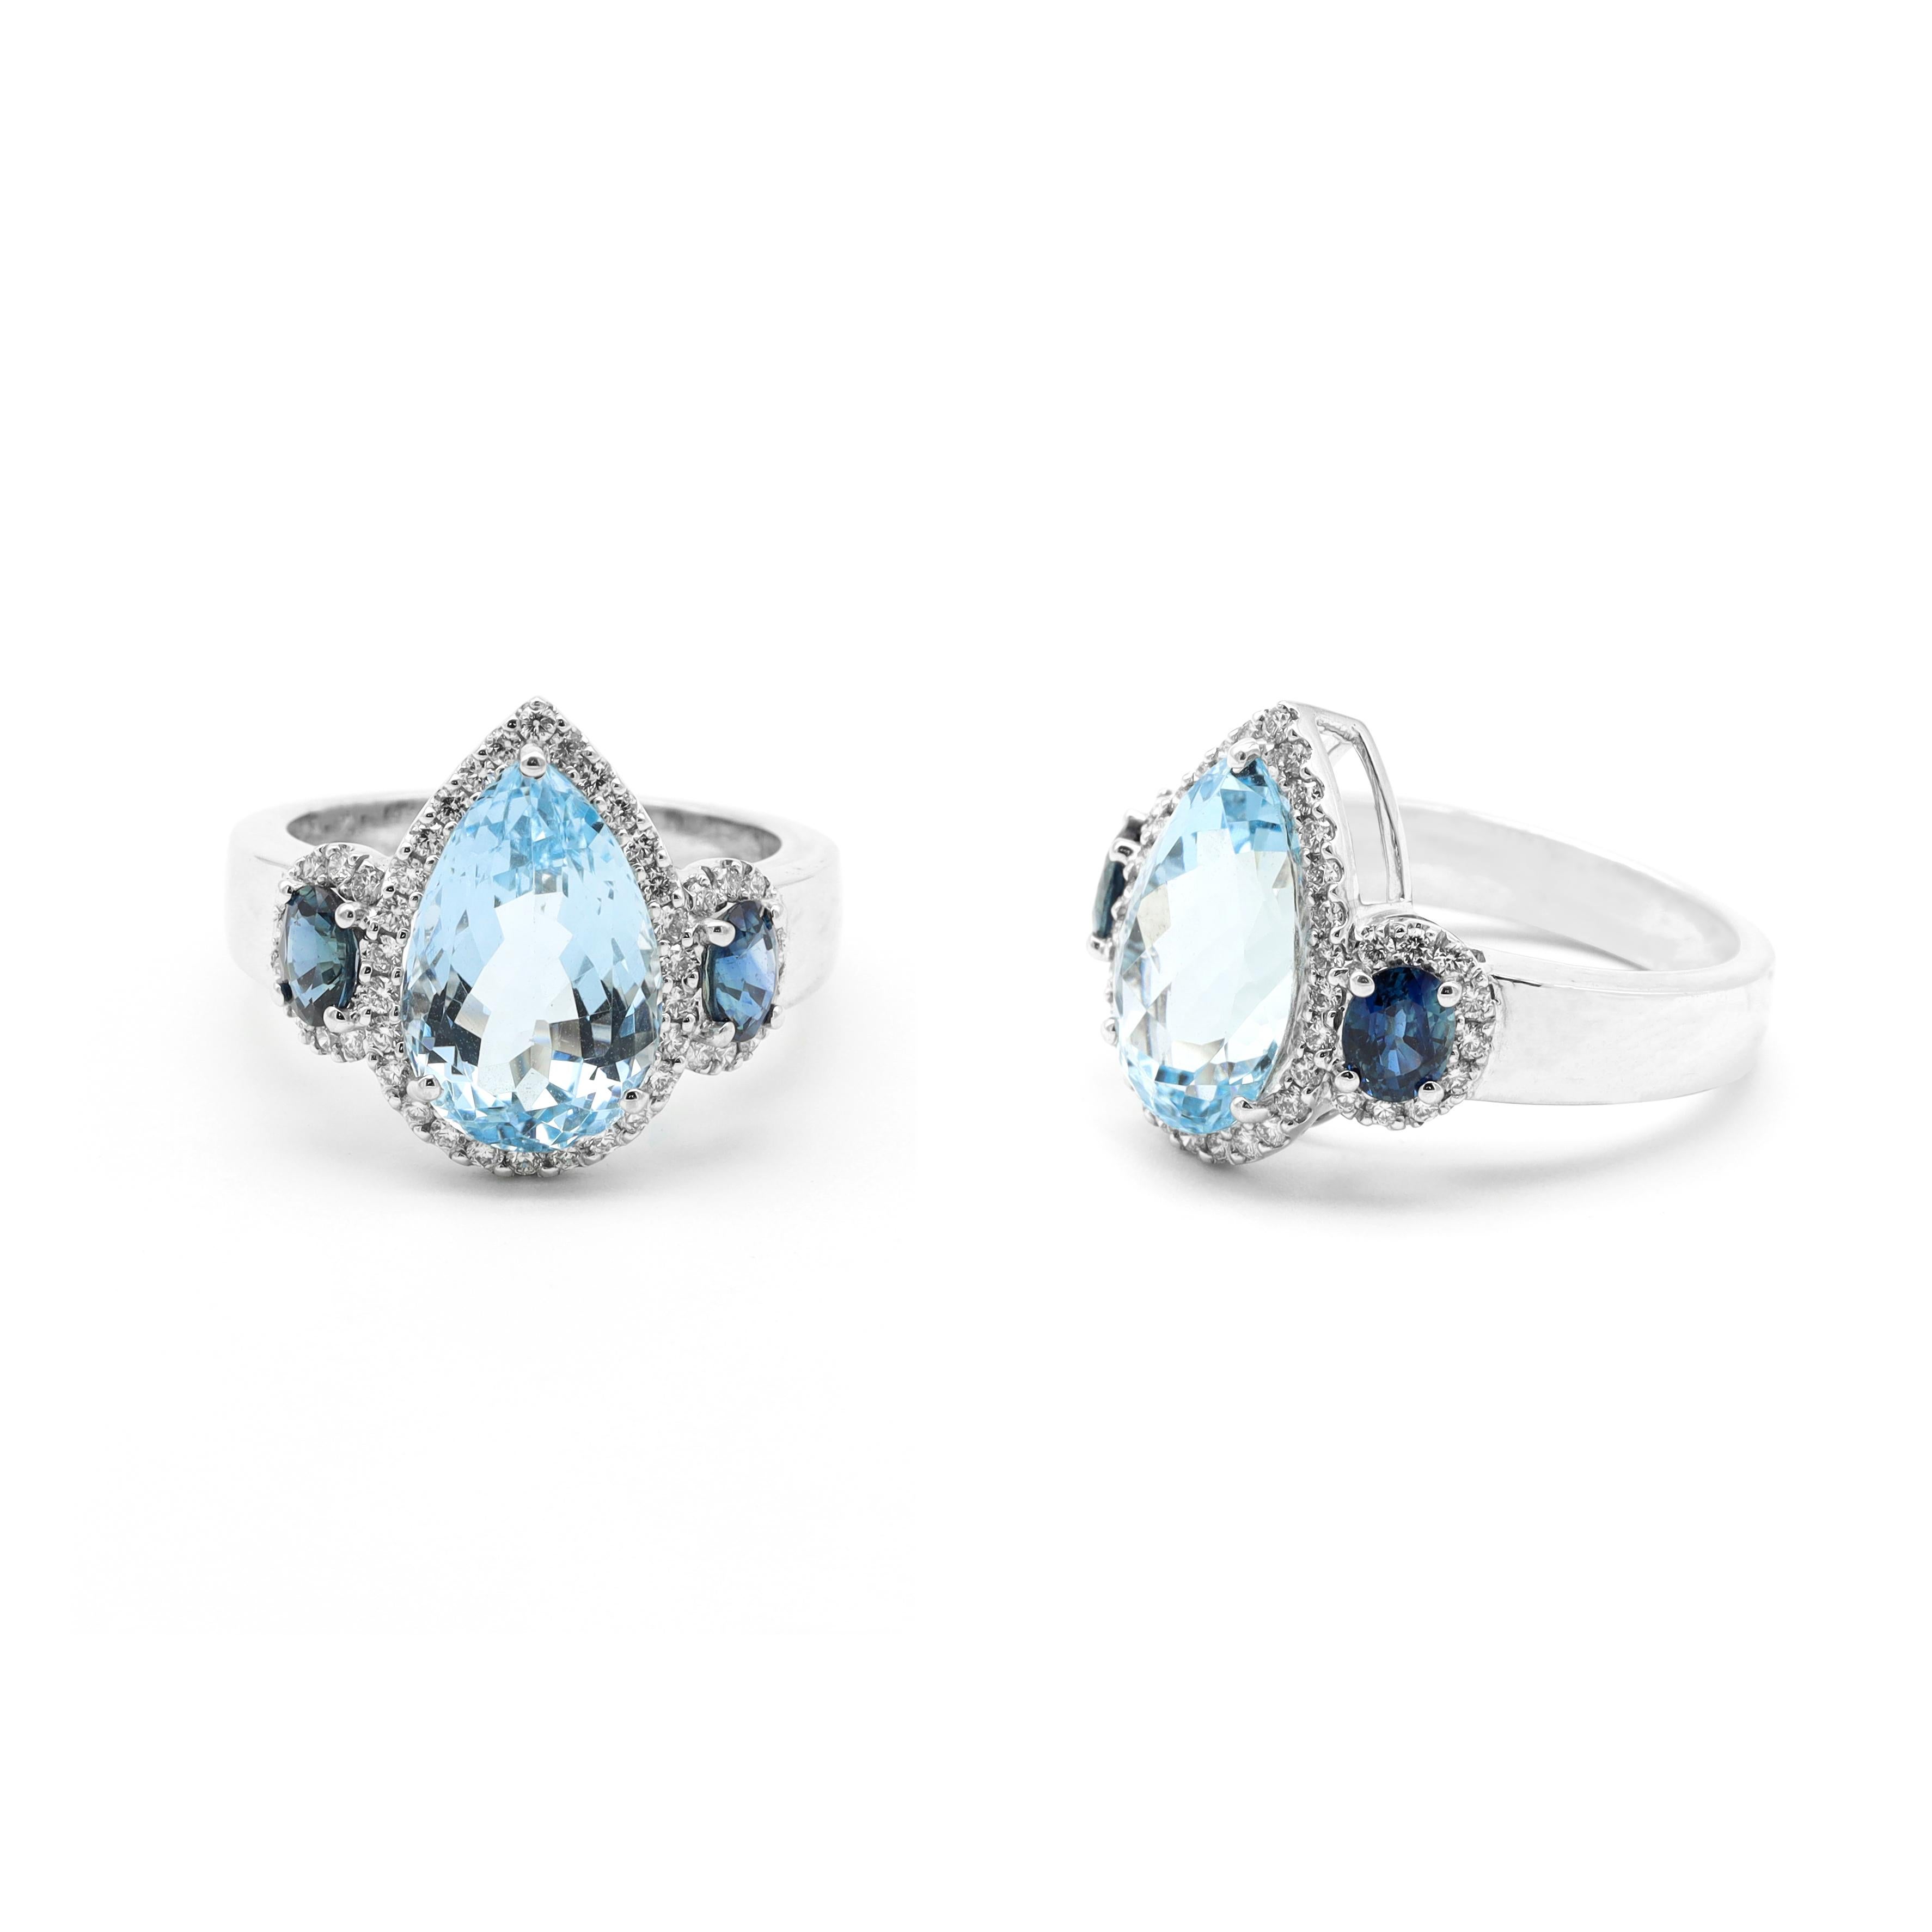 18 Karat White Gold 4.44 Carat Aquamarine, Sapphire, and Diamond Three Stone Ring

This exquisite trinity aqua sky aquamarine and azure blue sapphire diamond cluster ring is magnificent. The three-stone trinity ring tells a story by not only